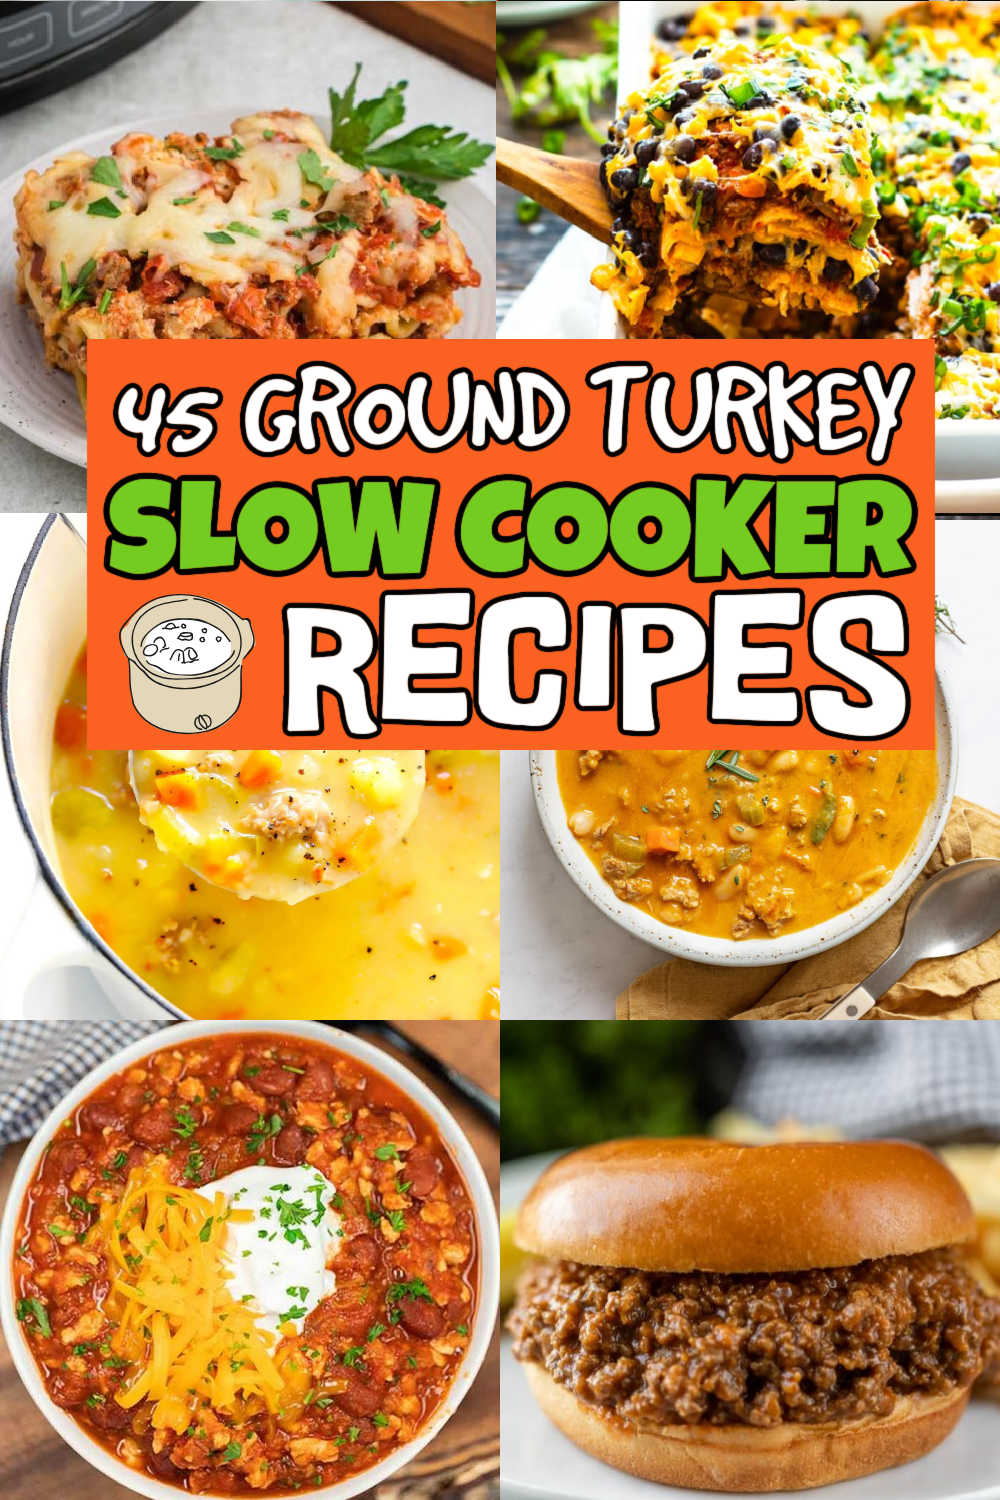 Make these ground turkey crock pot recipes that are delicious. We’ve rounded up the 45 best ground turkey crock pot recipes for a busy weeknight. Spend a wonderful dinner with your family by making these crock pot recipes with ground turkey. #eatingonadime #groundturkeycrockpotrecipes #groundturkeyrecipes